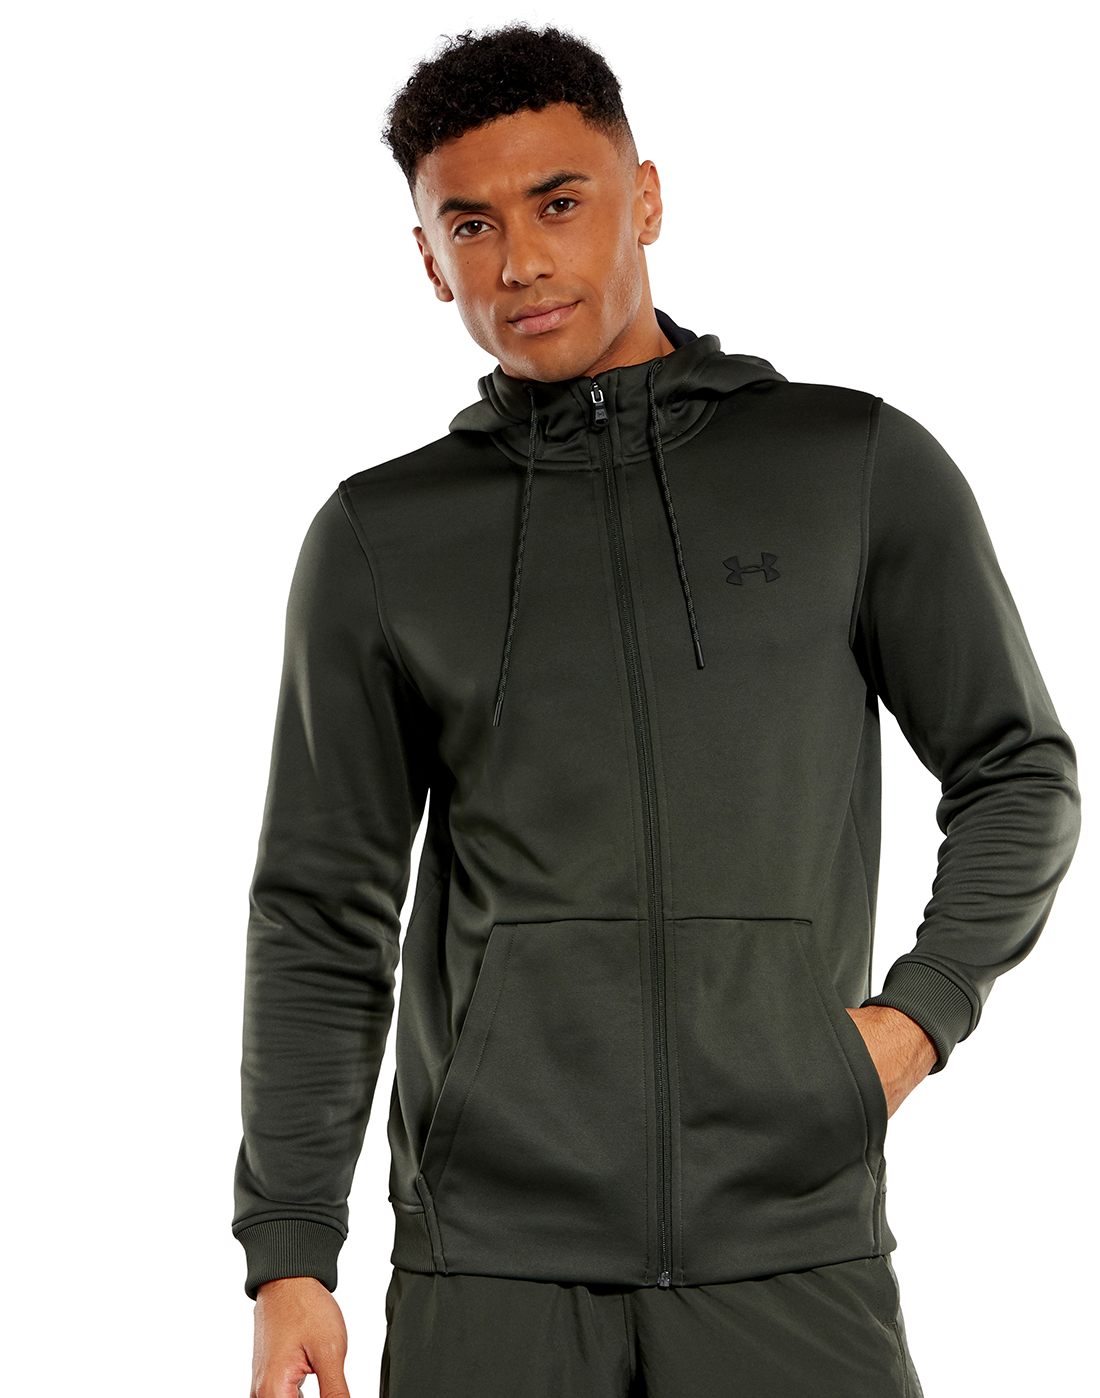 Under Armour Mens Rival Fleece Full Zip Hoodie Black Sports Gym Breathable 